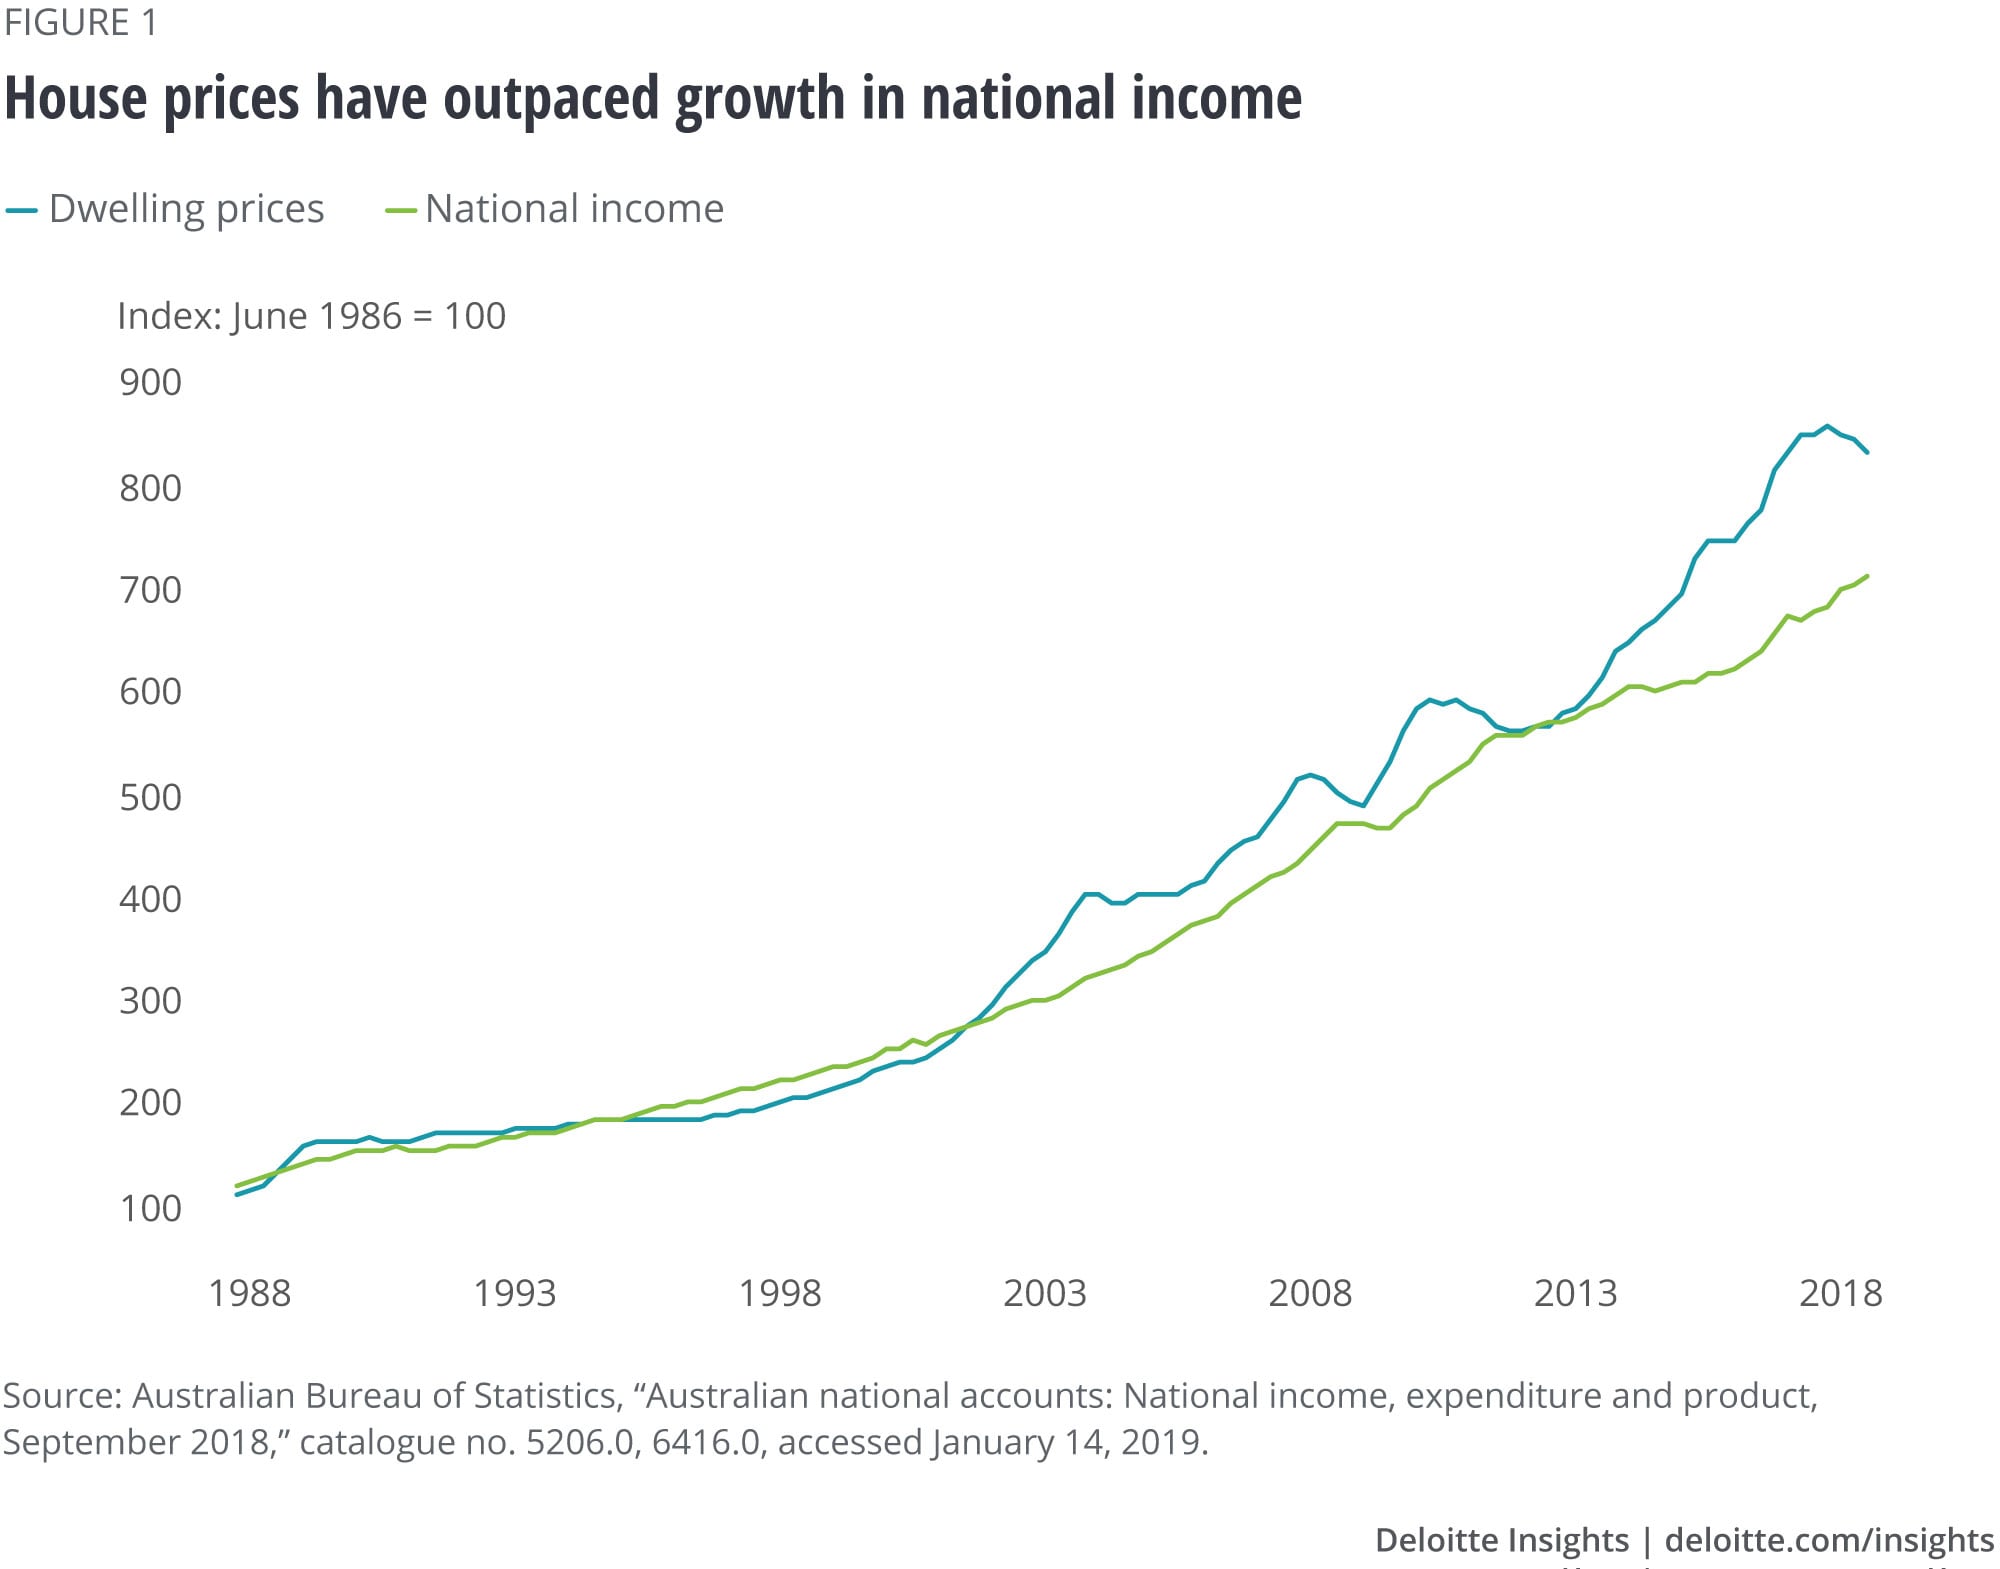 House prices have outpaced growth in national income